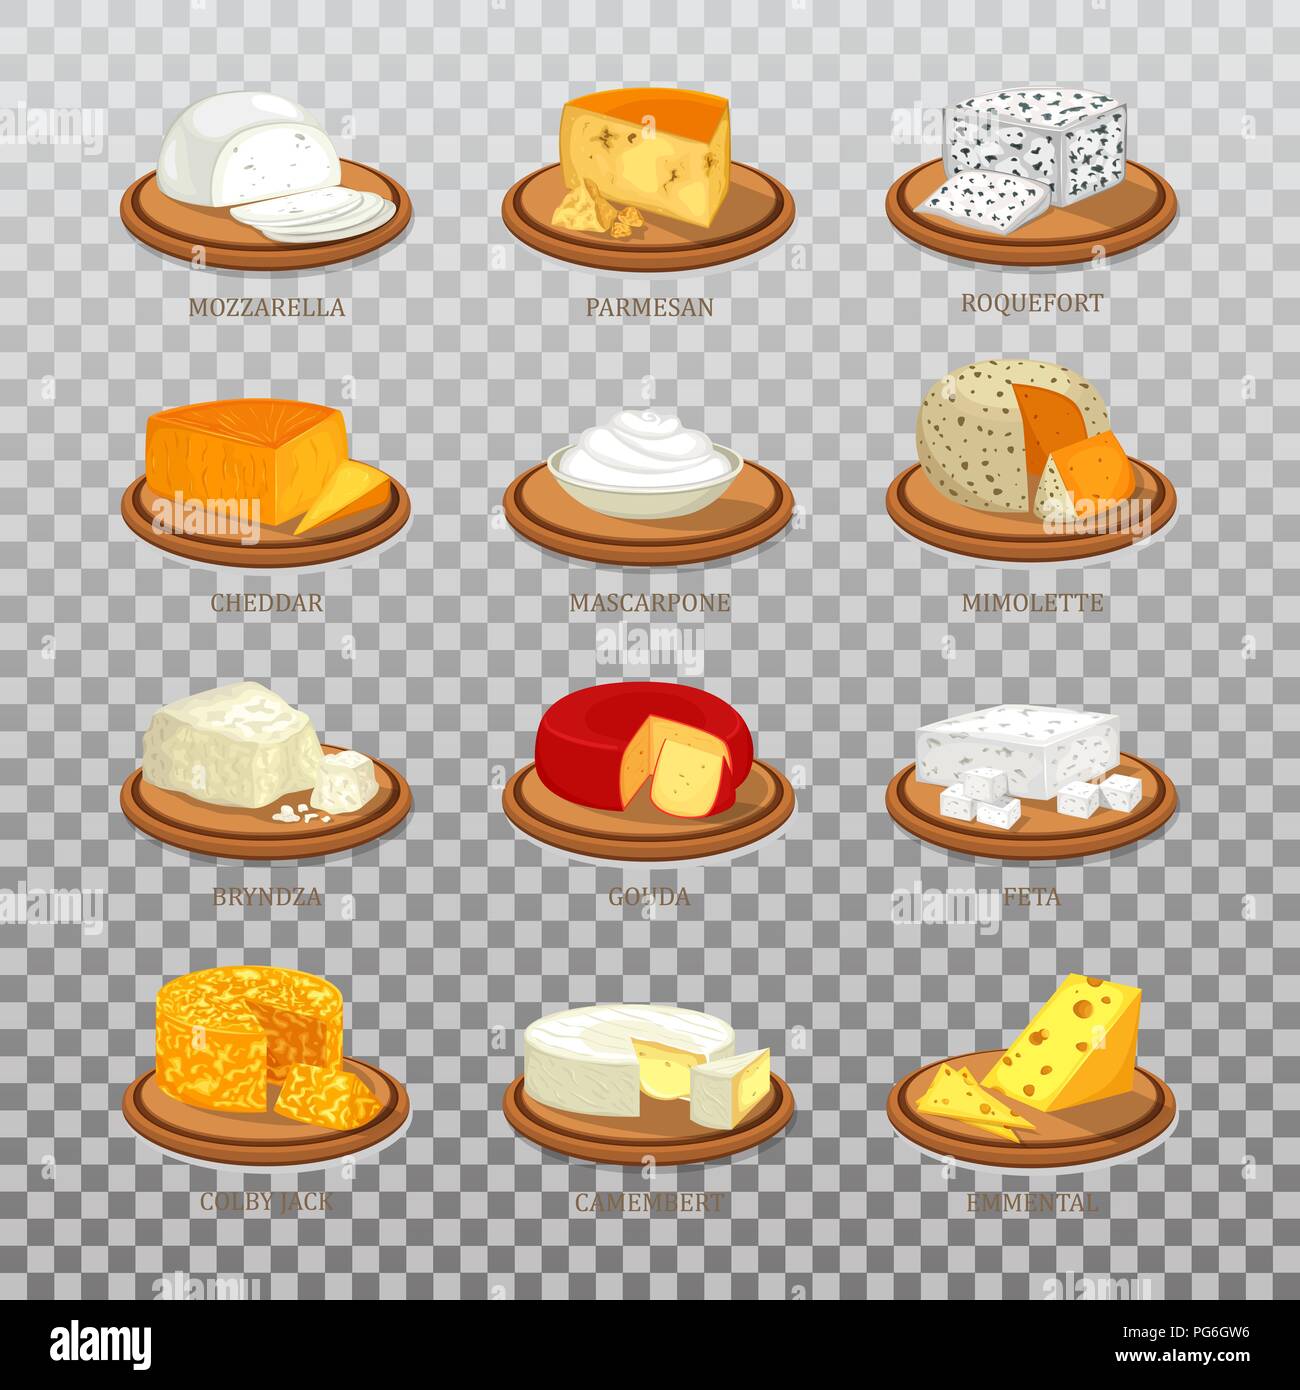 Isolated mozzarella cheese and parmesan or parmesan-reggiano food, roquefort and cheddar, mascarpone and mimolette, gouda and feta, bryndza and colby jack, camembert and emmental Stock Vector